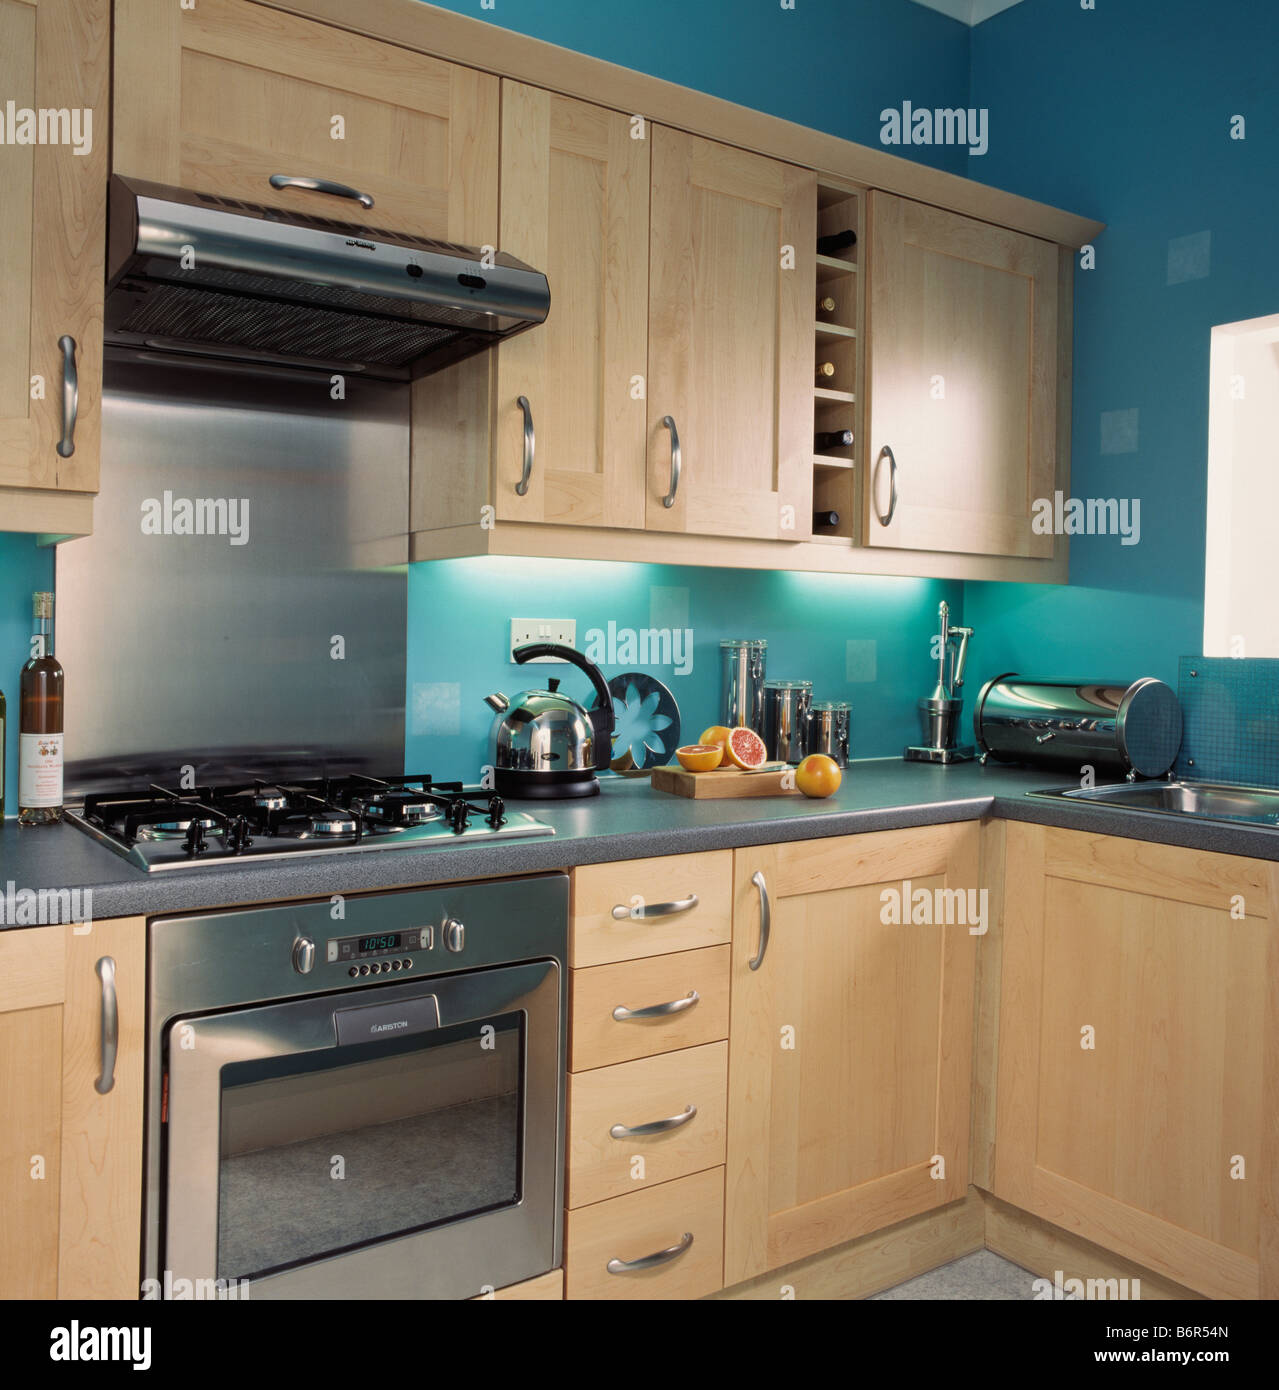 https://c8.alamy.com/comp/B6R54N/stainless-steel-oven-in-turquoise-kitchen-with-pale-wood-units-and-B6R54N.jpg